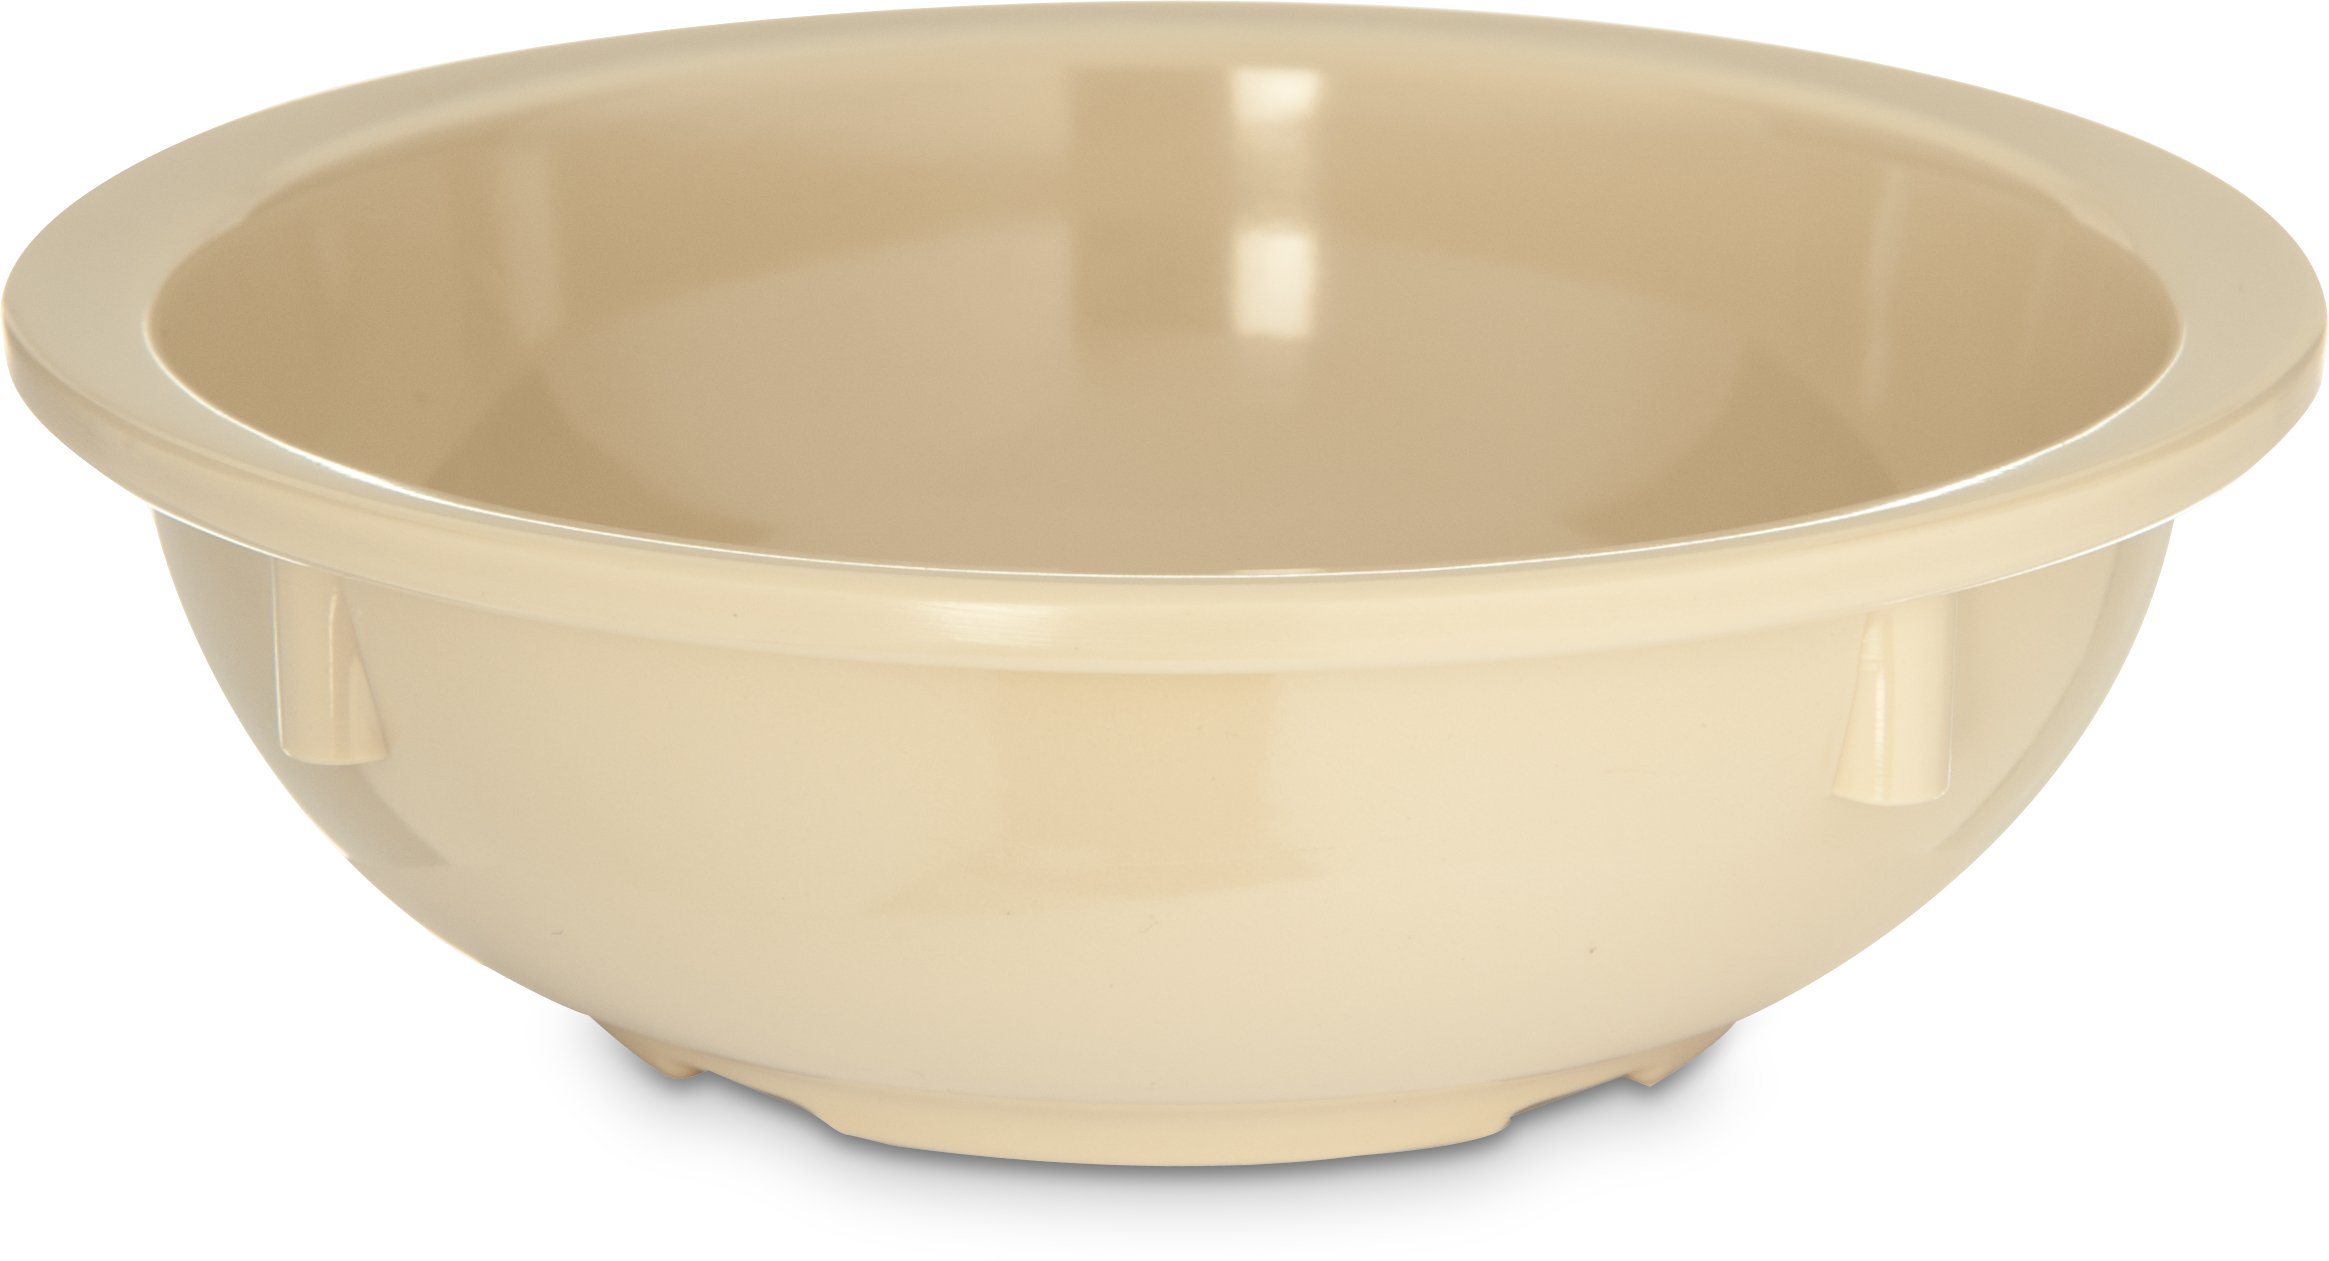 Carlisle FoodService Products Kingline Reusable Plastic Bowl Nappie Bowl for Home and Restaurant, Melamine, 10 Ounces, Tan, (Pack of 48)